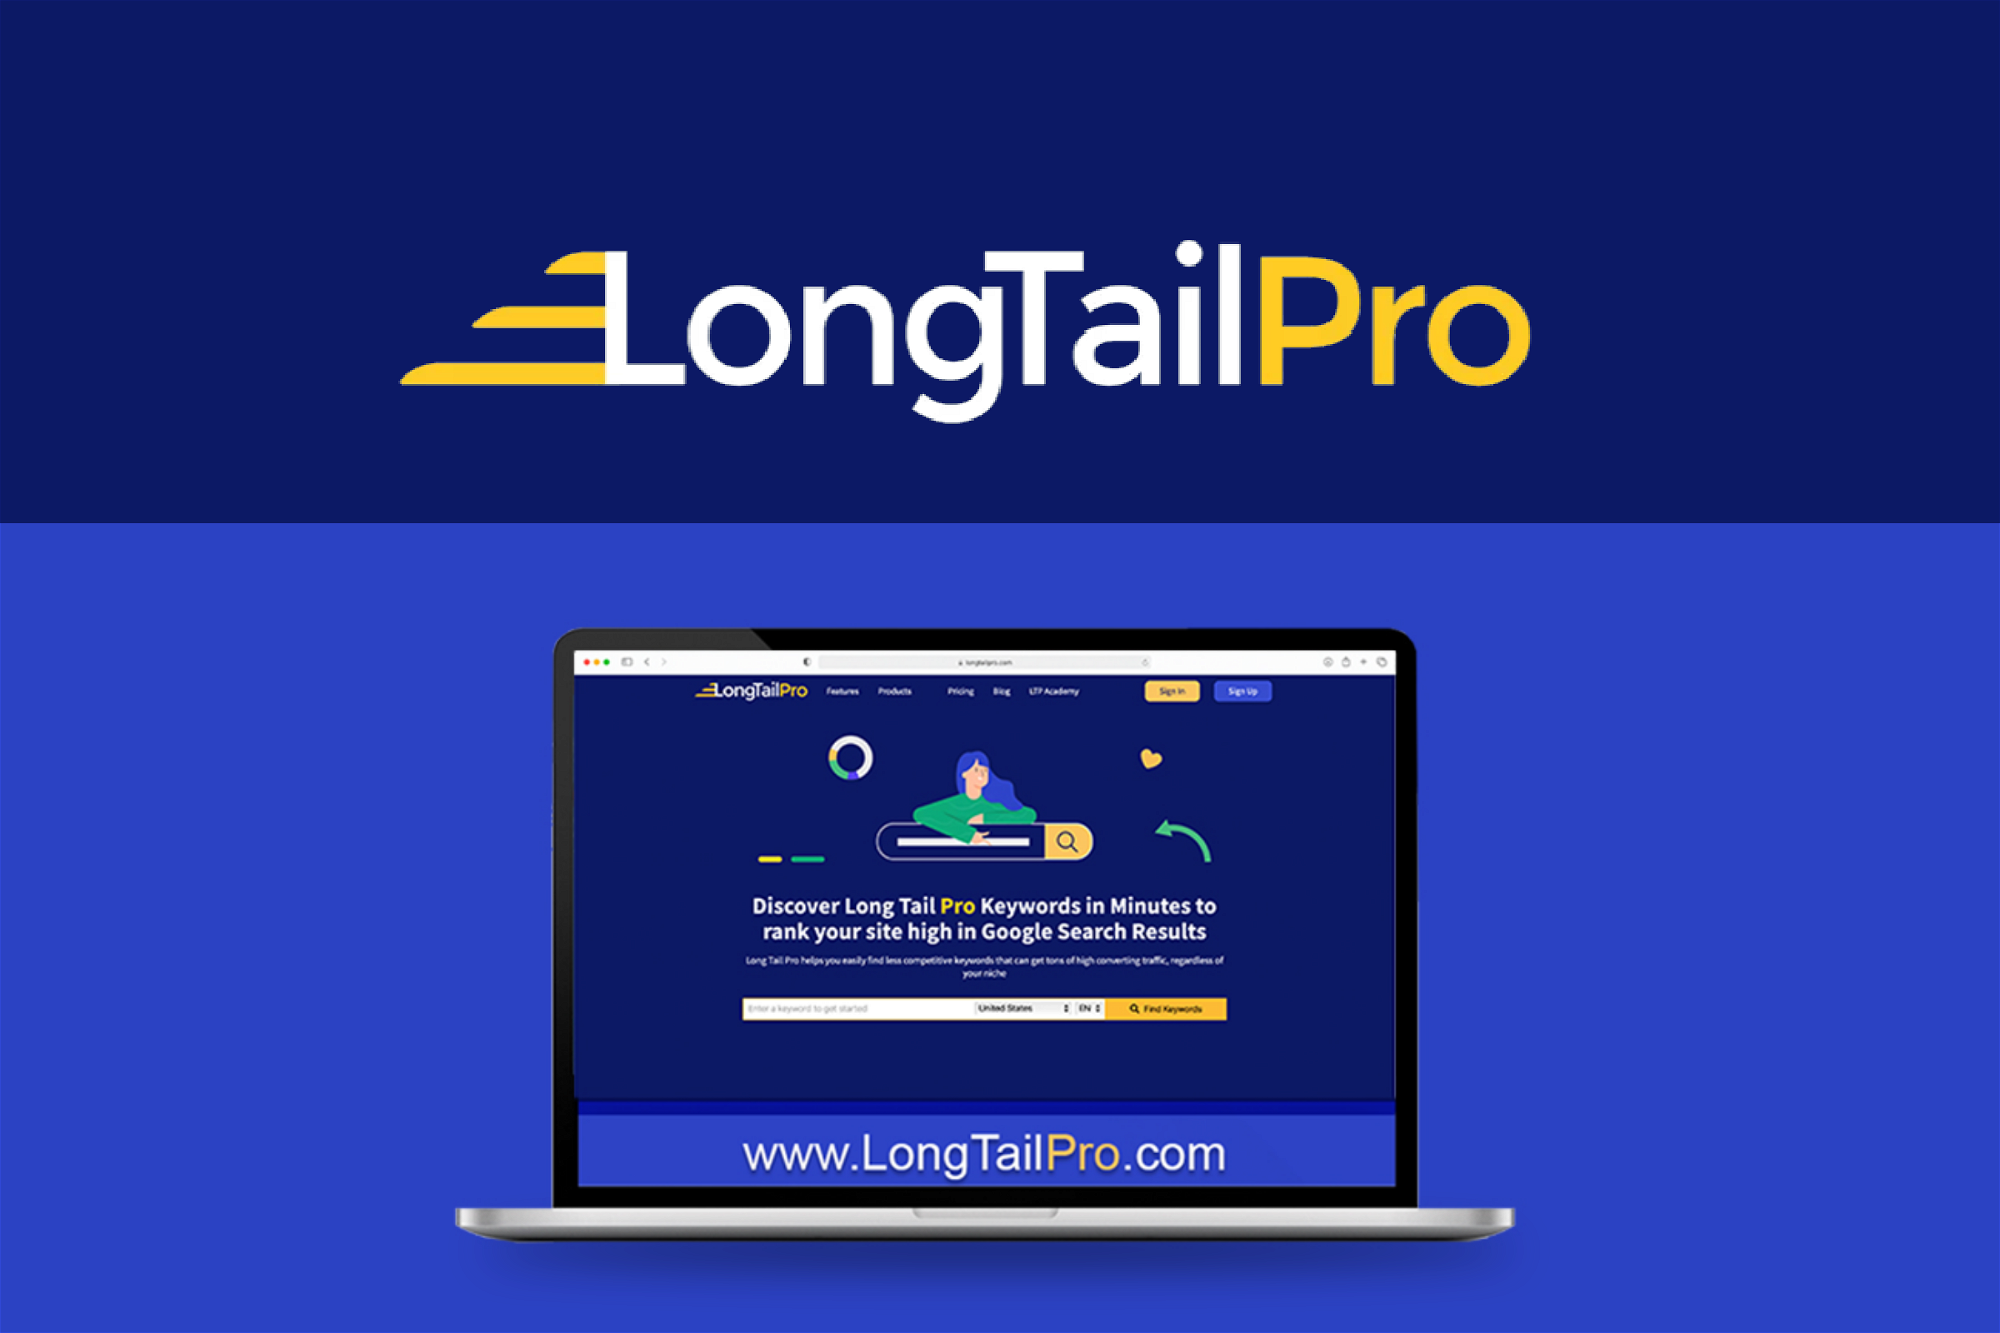 longtailpro-review-what-a-turnaround